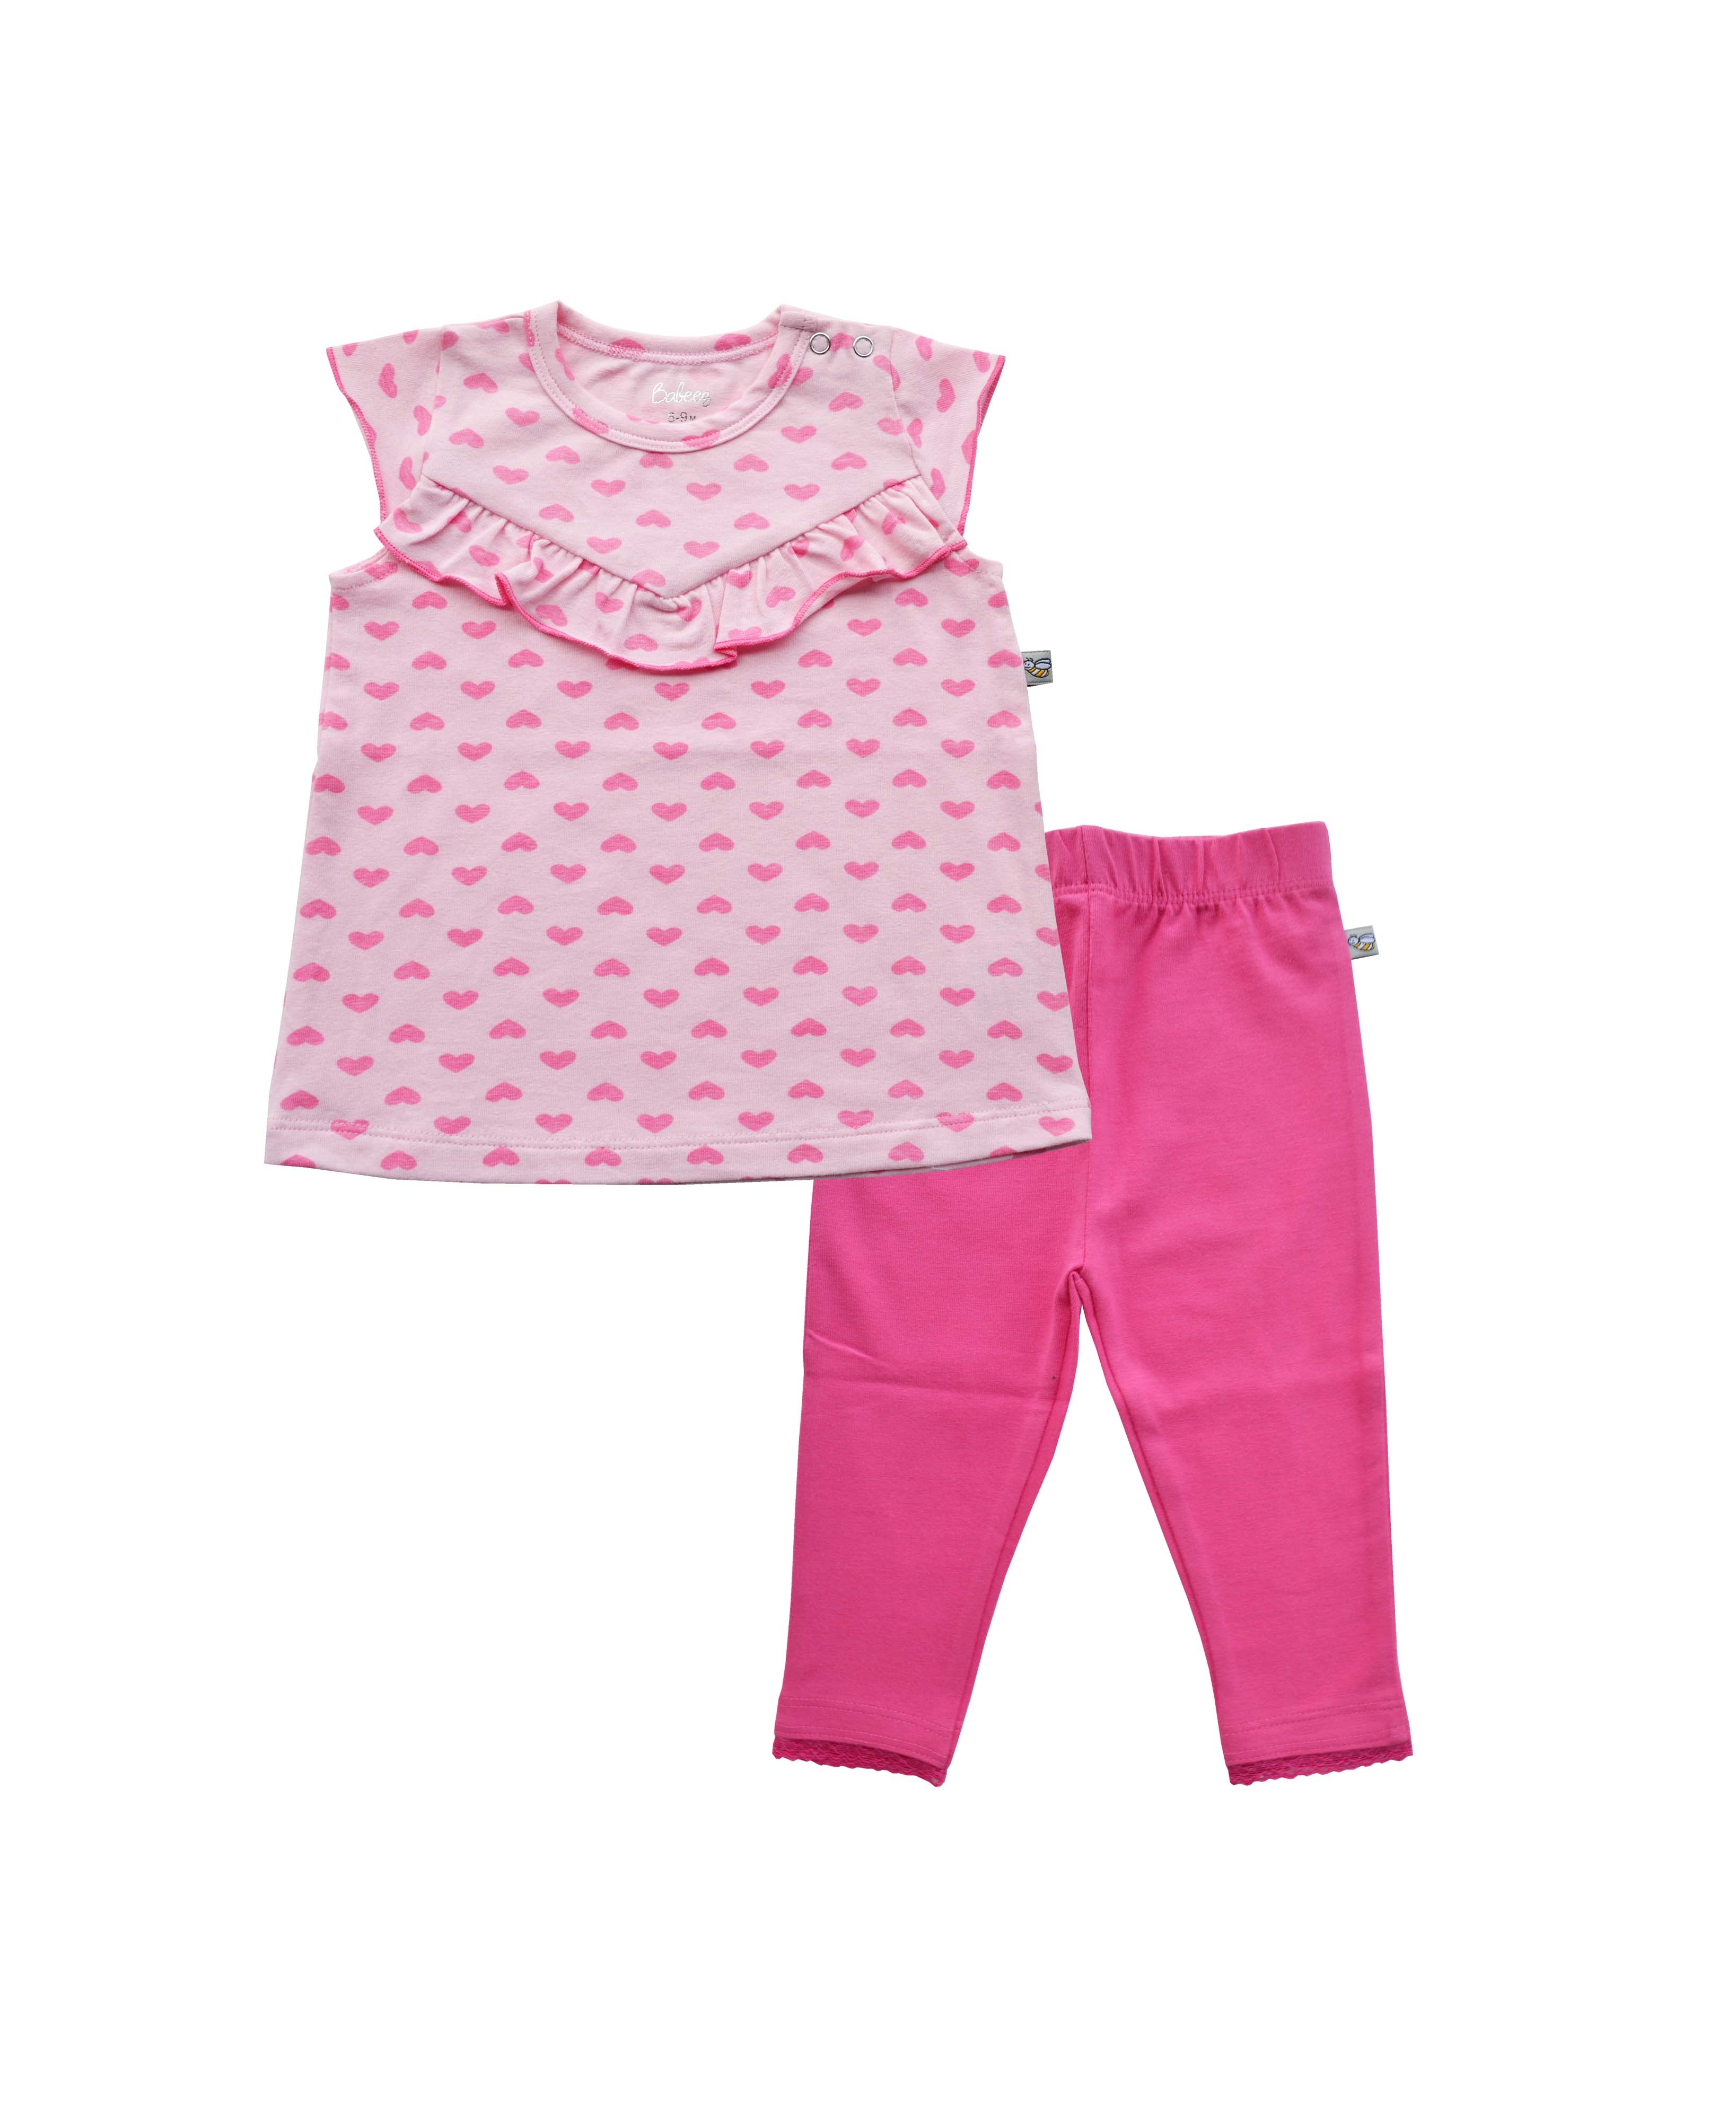 Allover Heart Print on Pink Sleeveless Top and Fushia Solid Leggings (95% Cotton 5% Elasthan Jersey)